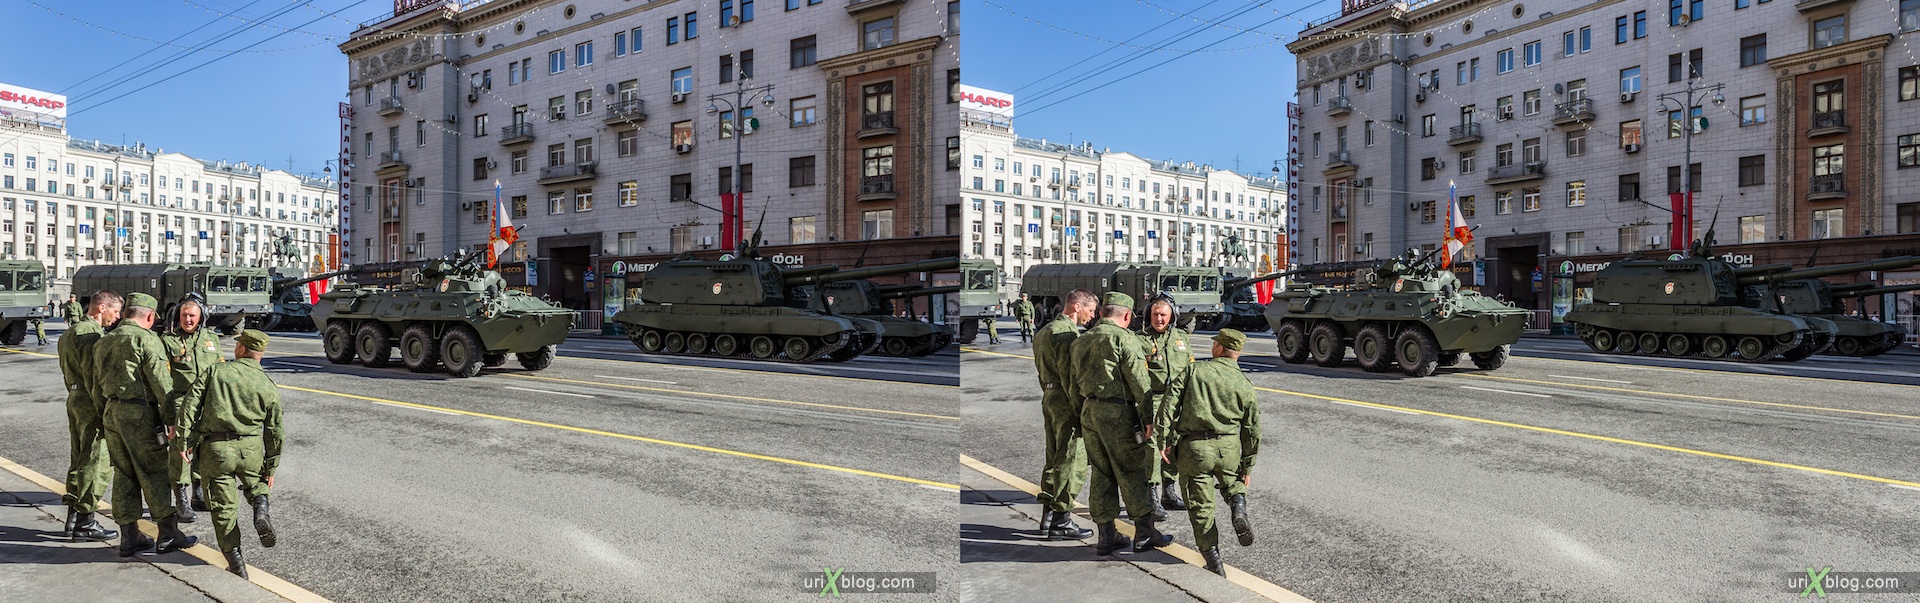 2013, Russia, Moscow, 9 may, parade training, Tverskaya street, preparations, military vehicles, tanks, soldiers, armored troop-carrier, 3D, stereo pair, cross-eyed, crossview, cross view stereo pair, stereoscopic